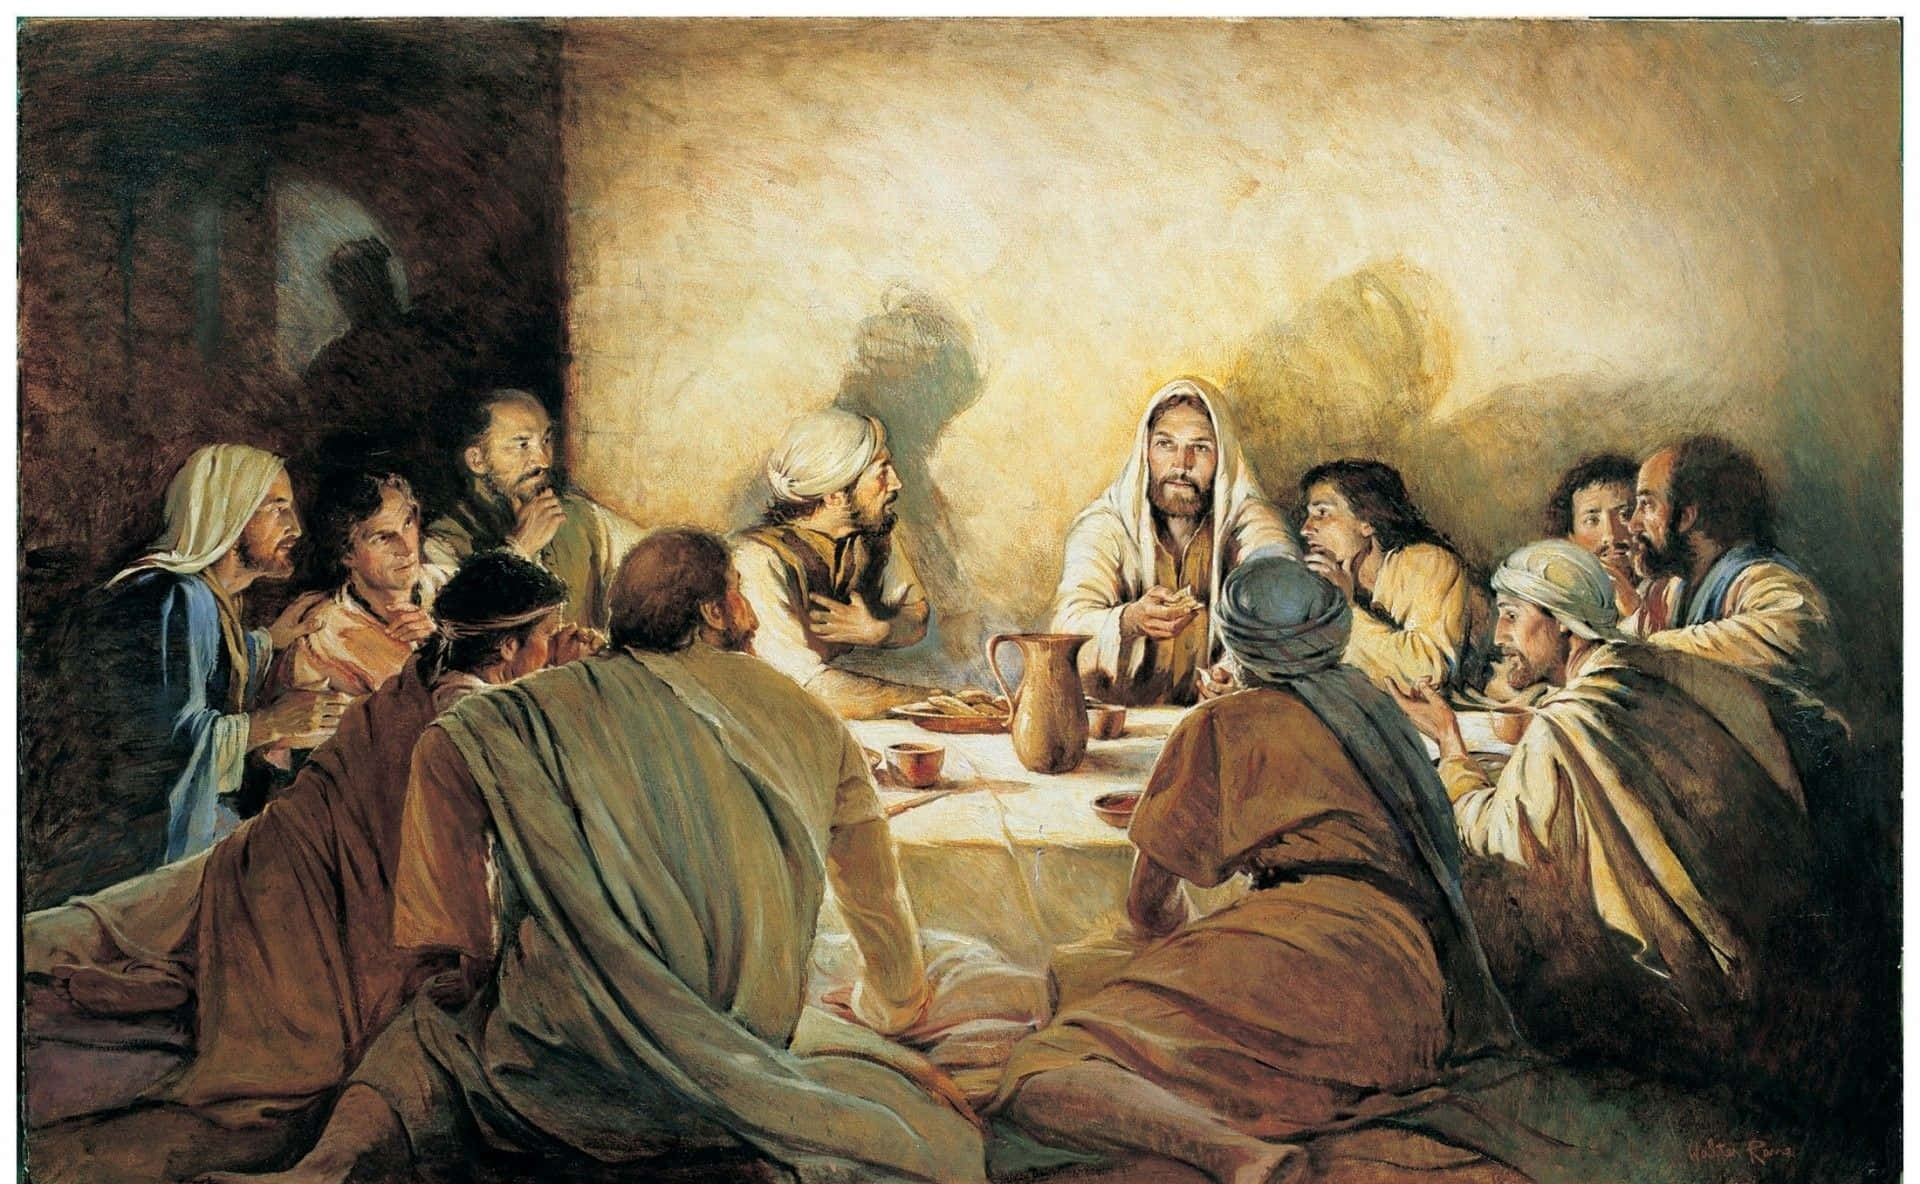 The Last Supper Painting: Wallpaper